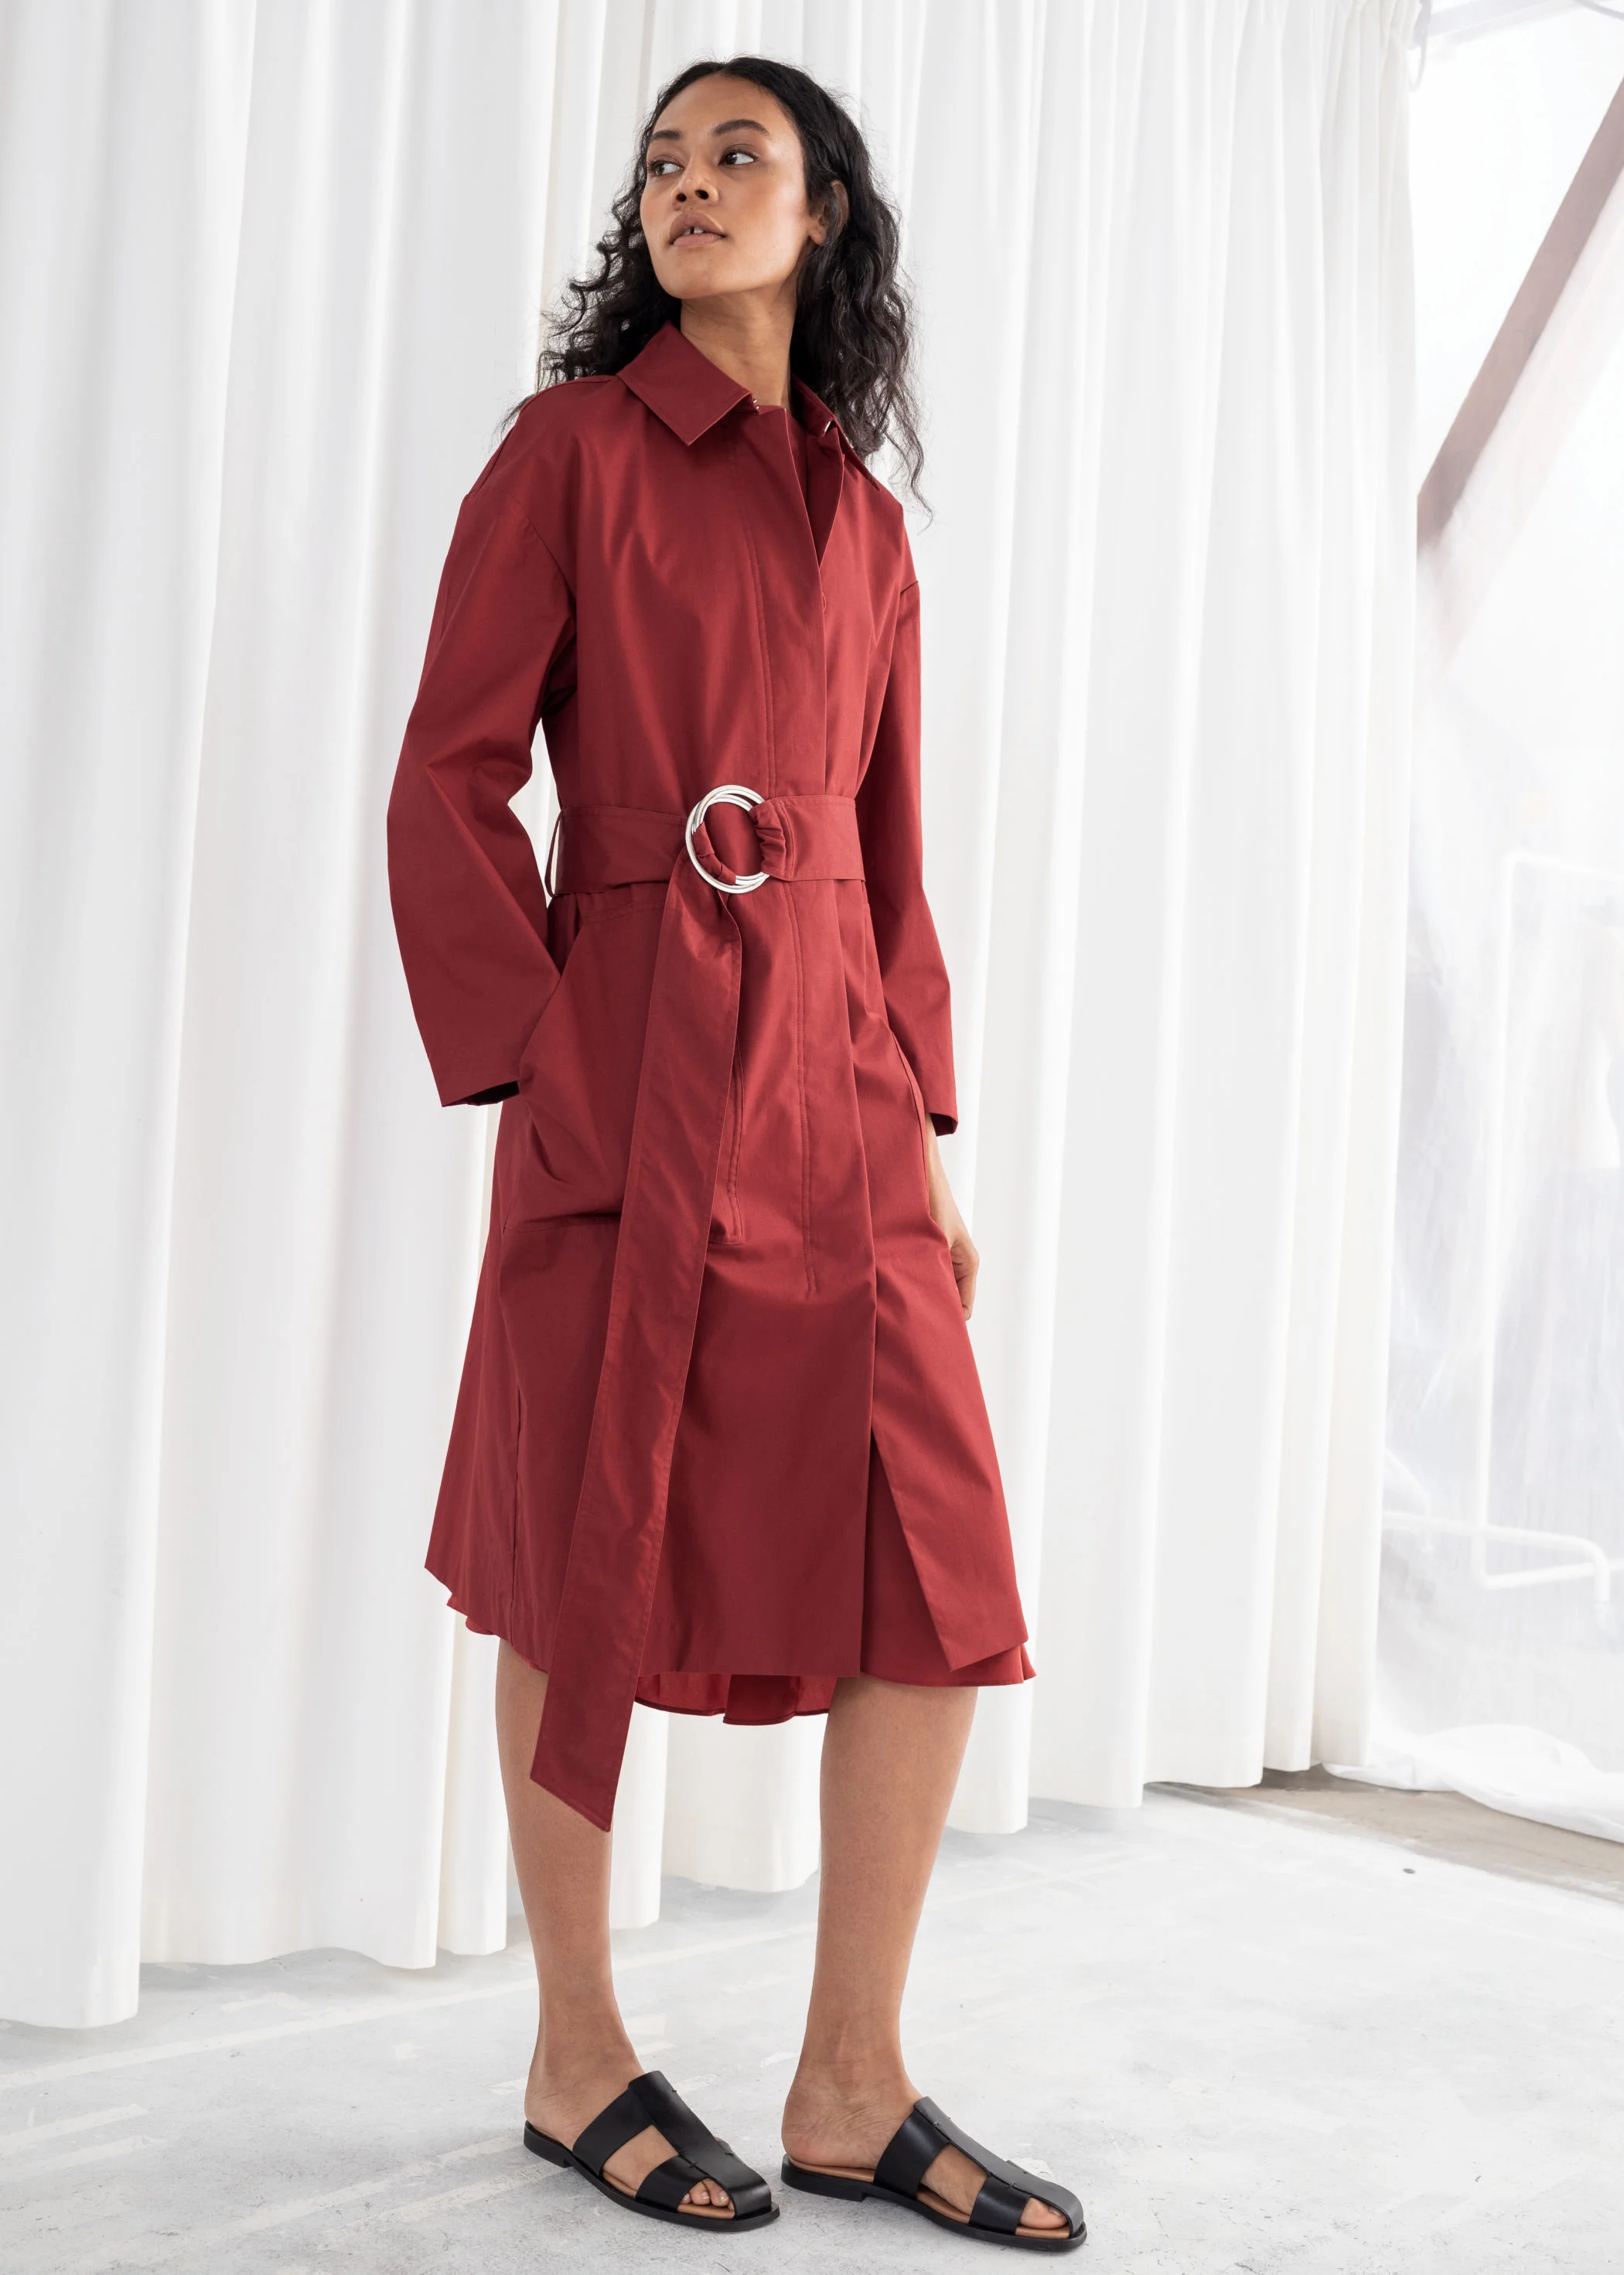 Belted Cotton Twill Trenchcoat, Other Stories Belted Cotton Twill Trench Coat